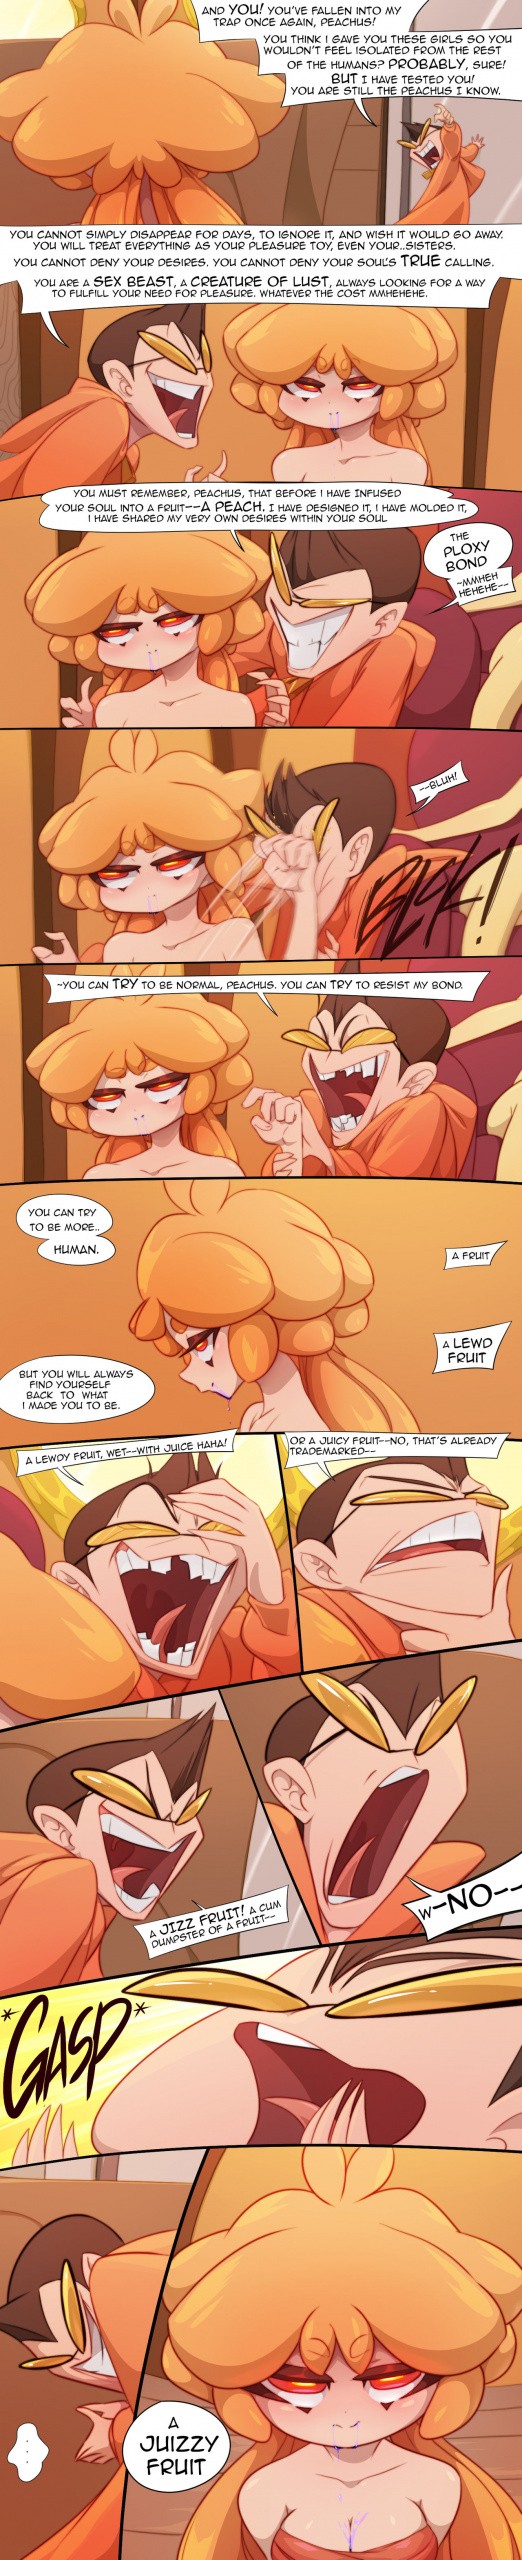 Juizzy Fruits: Peachy’s New Friends porn comic picture 59